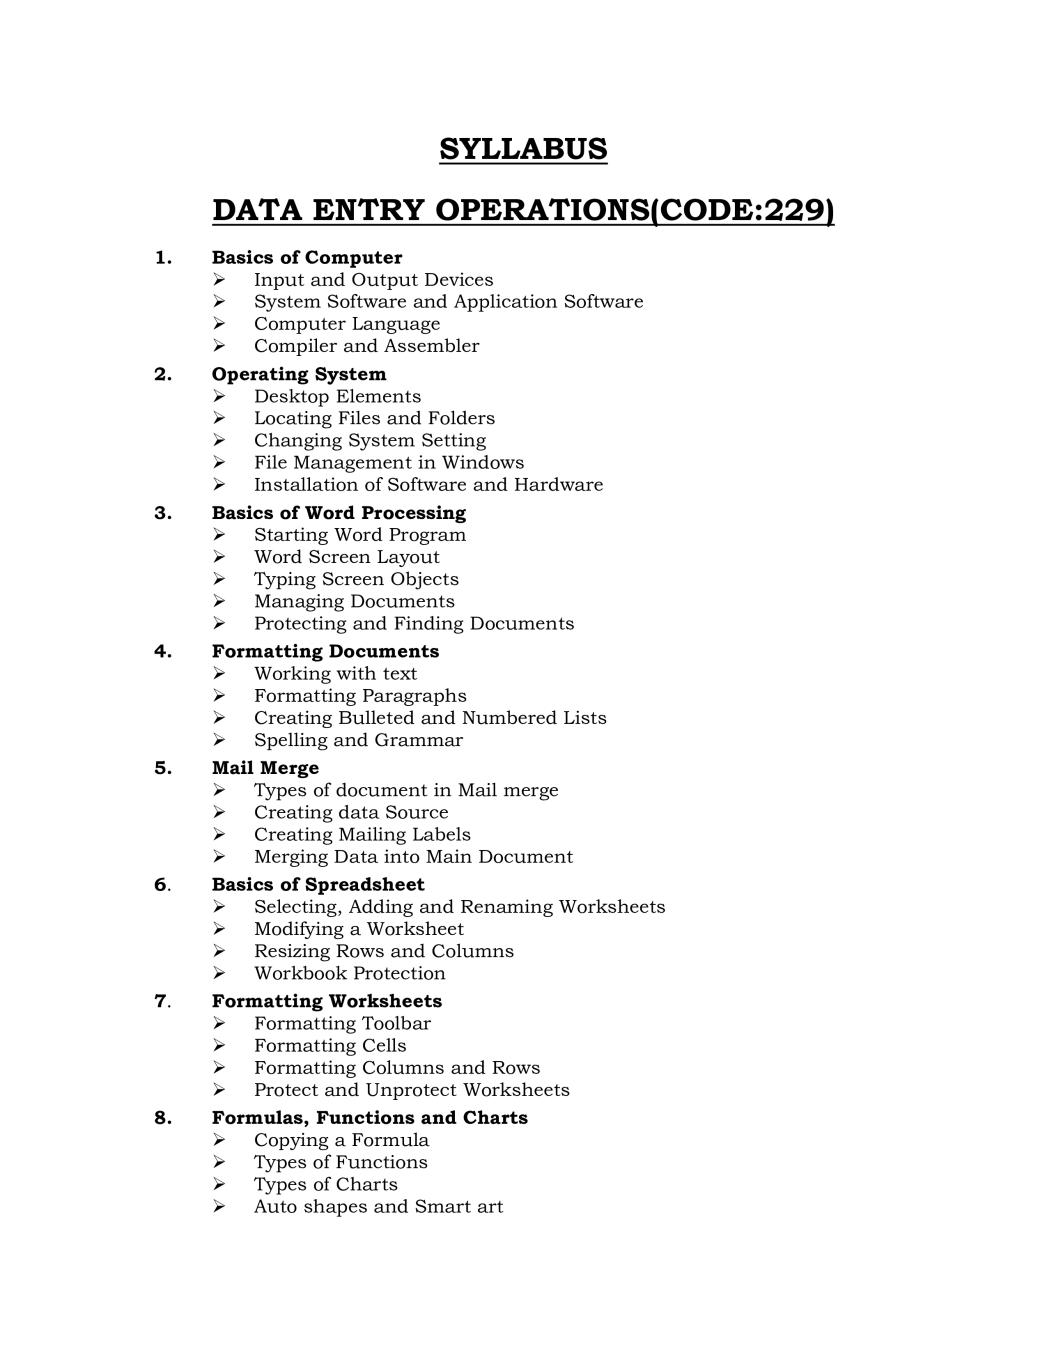 NIOS Class 10 Syllabus - Data Entry and Operations - Page 1